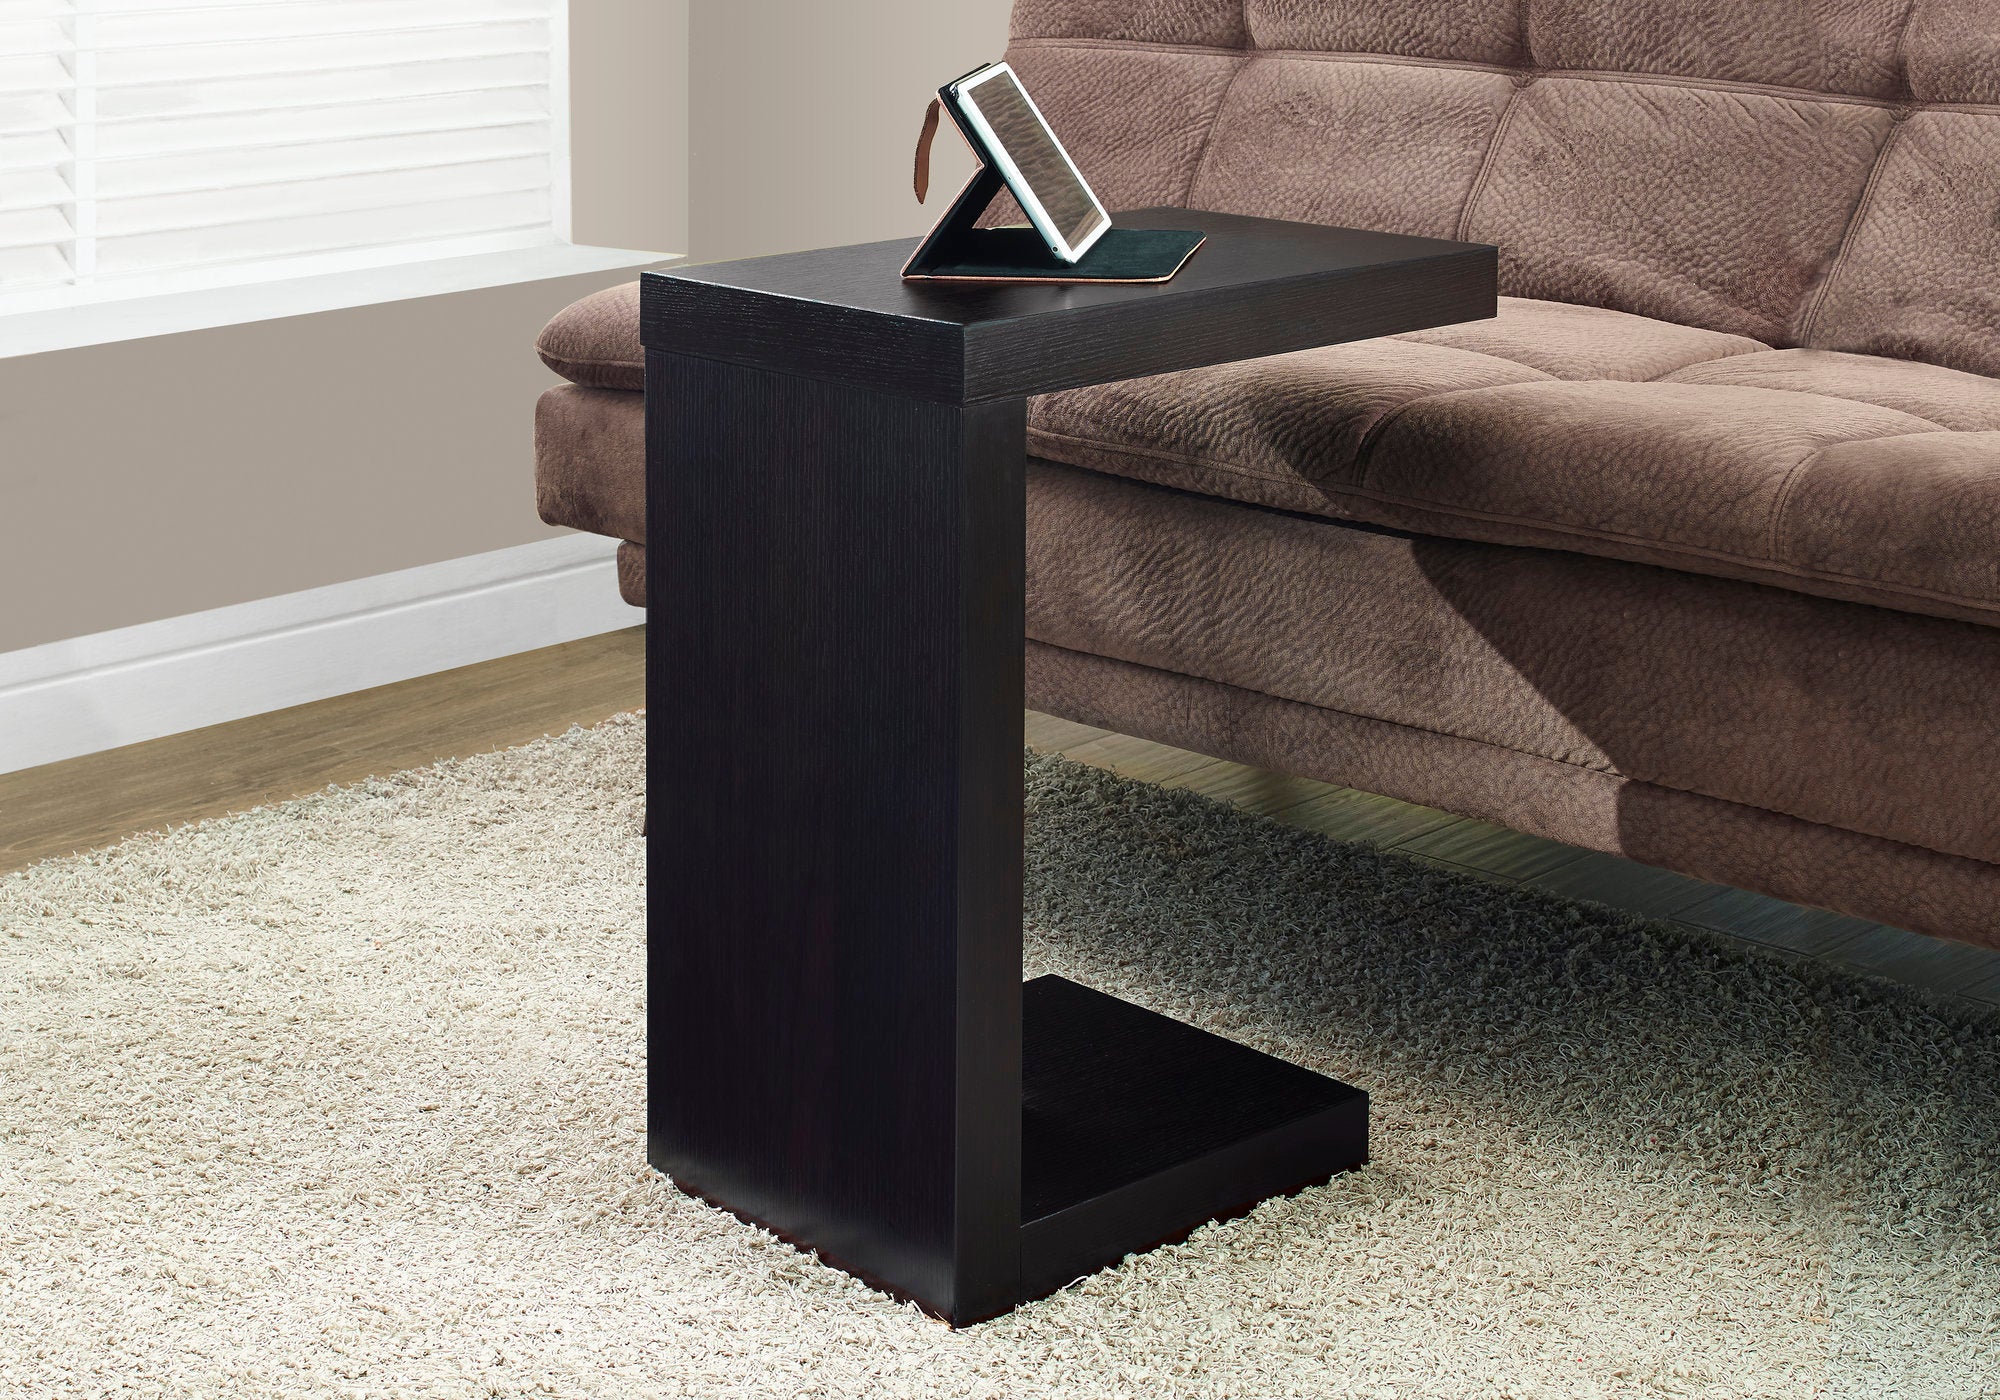 MN-422486    Accent Table, C-Shaped, End, Side, Snack, Living Room, Bedroom, Laminate, Dark Brown, Contemporary, Modern